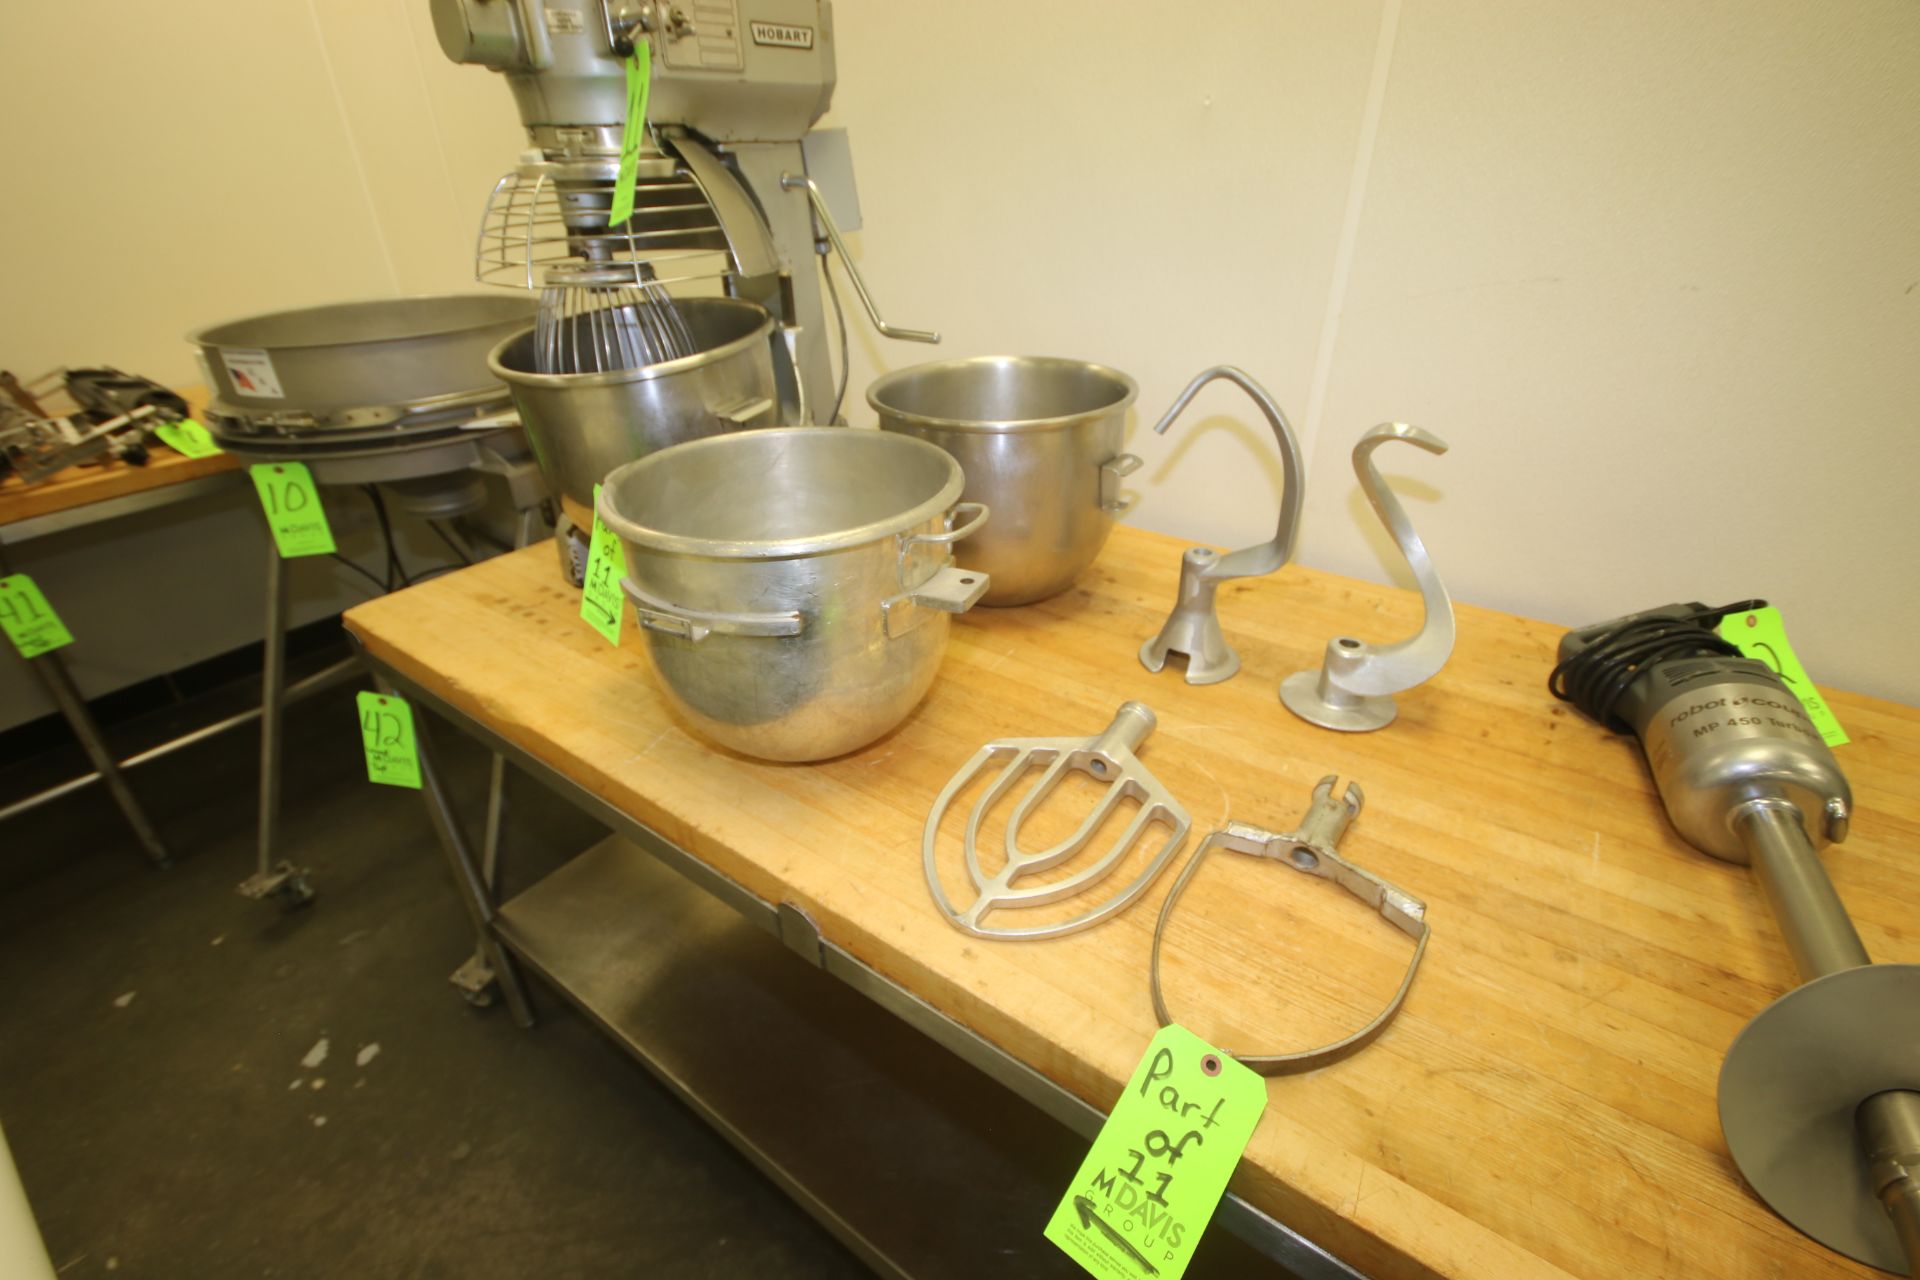 Hobart Counter Top Mixer, M/N A 200, S/N 11-376-471, 115 Volts, 1 Phase, with 1725 RPM Motor, - Image 3 of 7